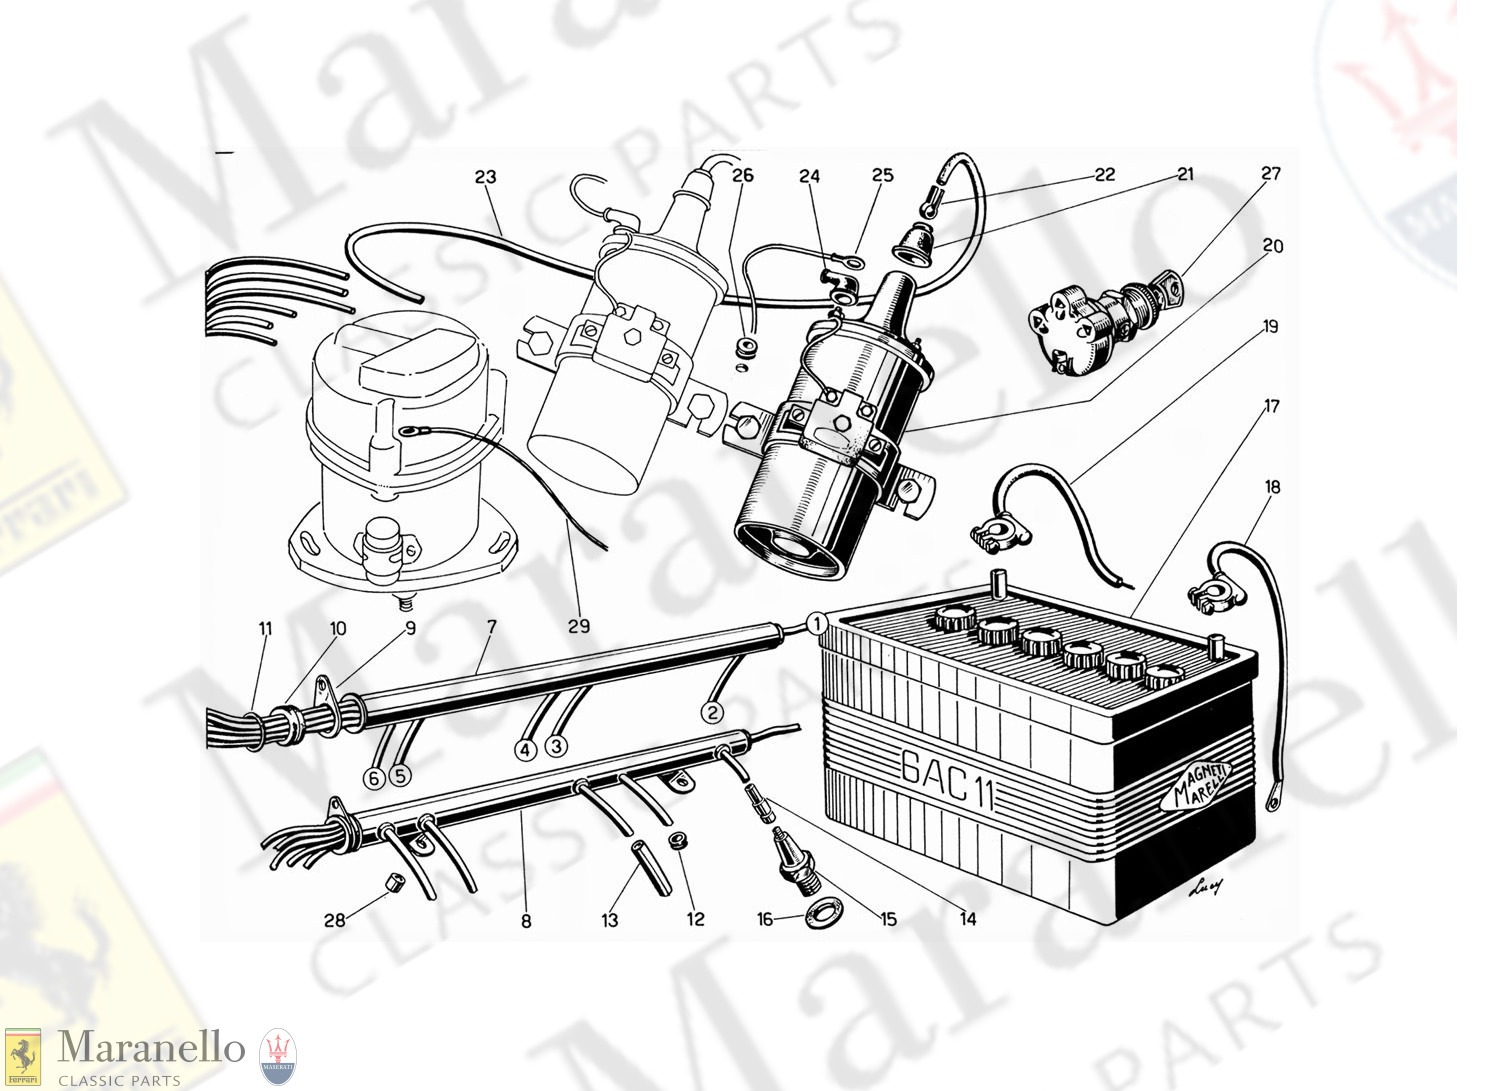 014 - Wiring - Ignition Coils And Battery